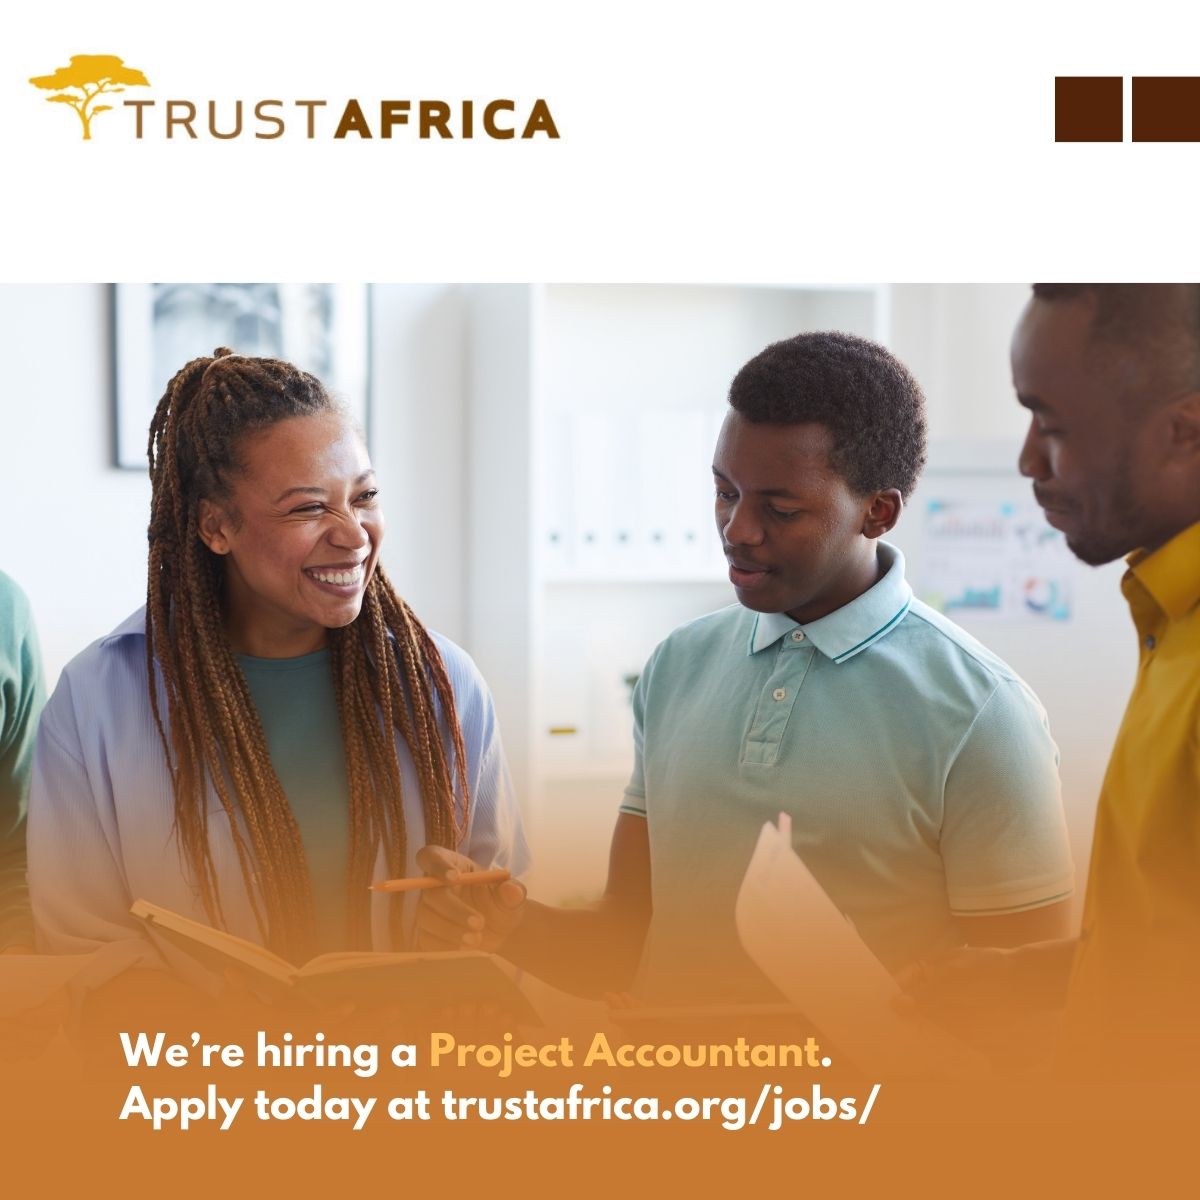 We are hiring trustafrica.bamboohr.com/careers/22 OSITION: Project Accountant Project: African Youth Panel Location: Dakar, Sénégal Application Deadline: 14-March-2024 Area of Focus: Finance and Accounting Languages Required: English or French)